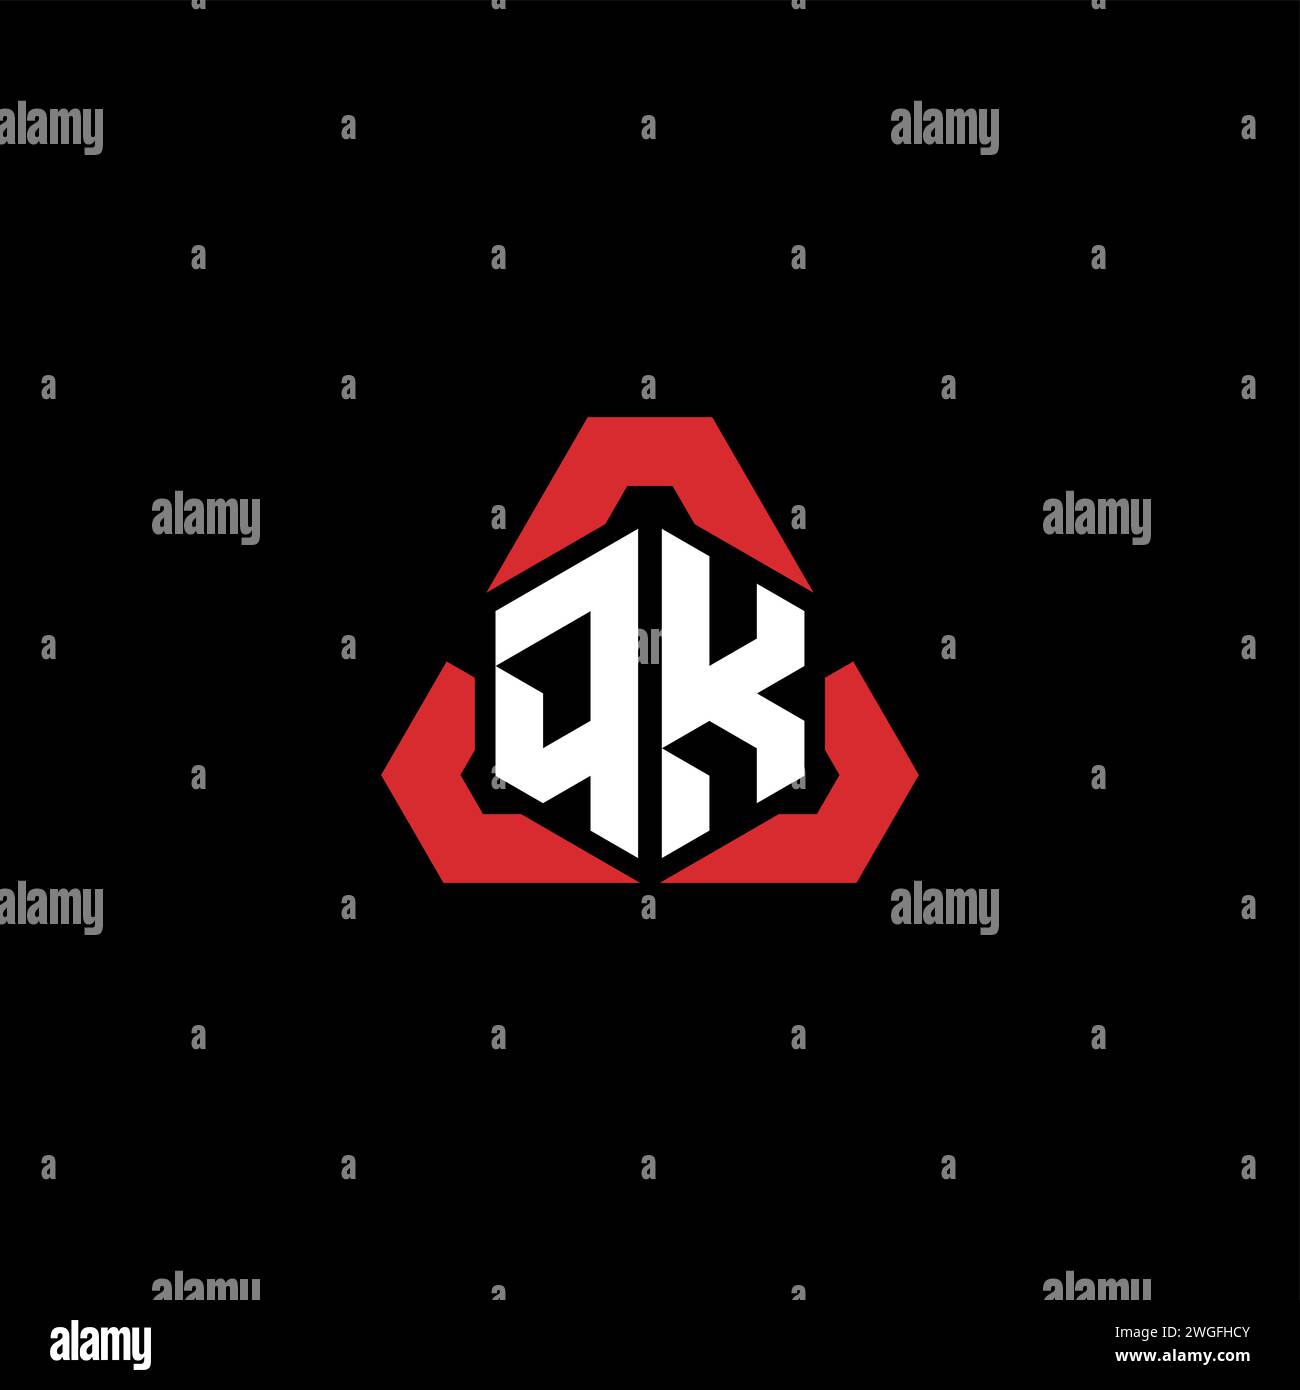 QK initial logo modern and futuristic concept for esport or gaming logo Stock Vector